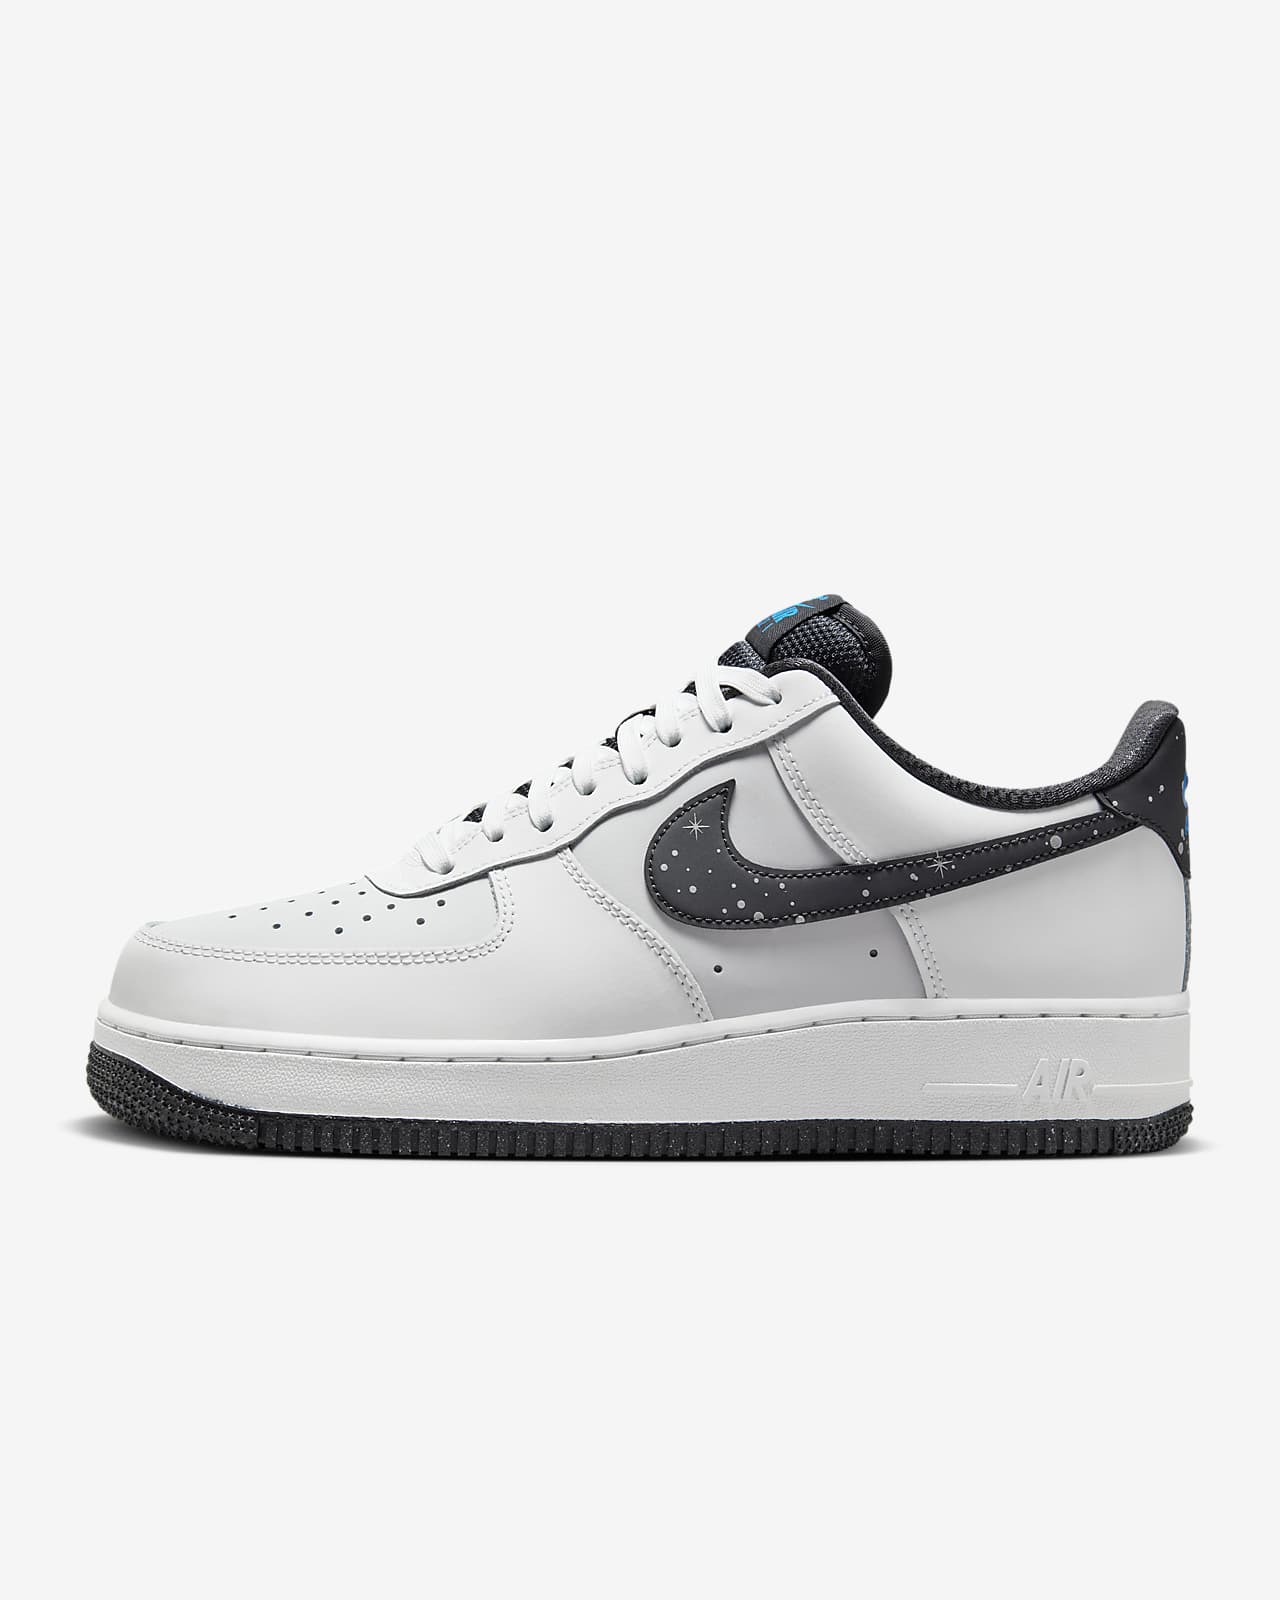 nike air force 1 07 lv8 remix sneakers in light blue